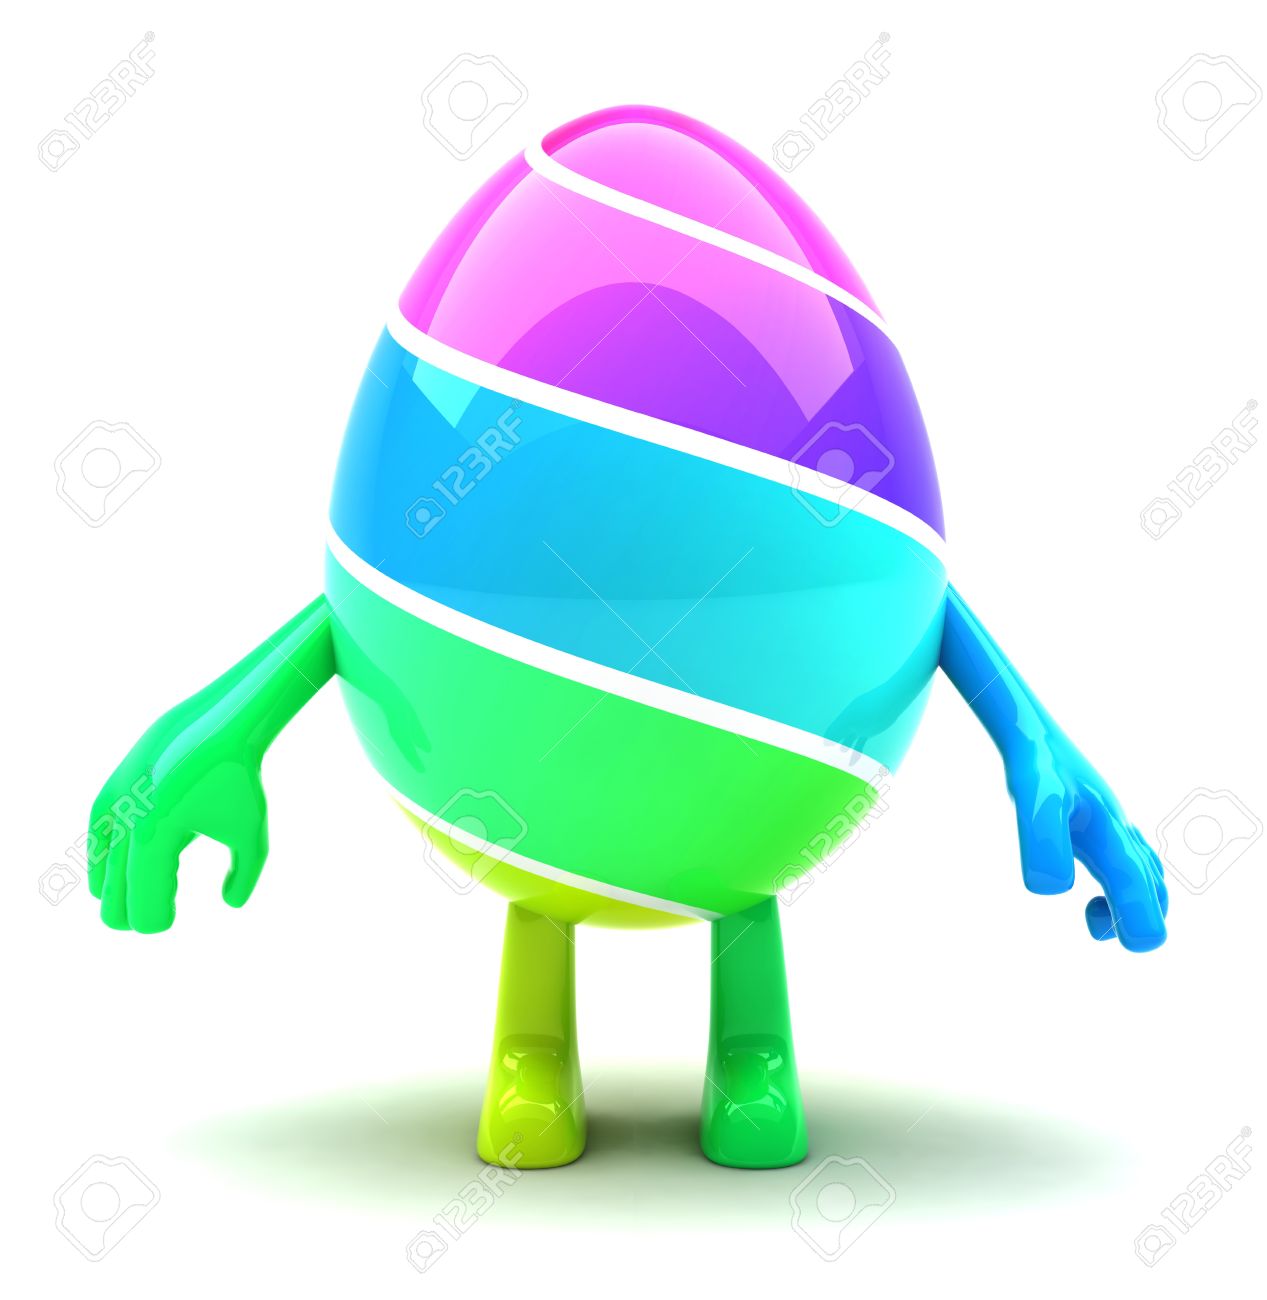 12285098-Beautiful-colored-Easter-egg-mascot-with-hands-and-feet-Stock-Photo